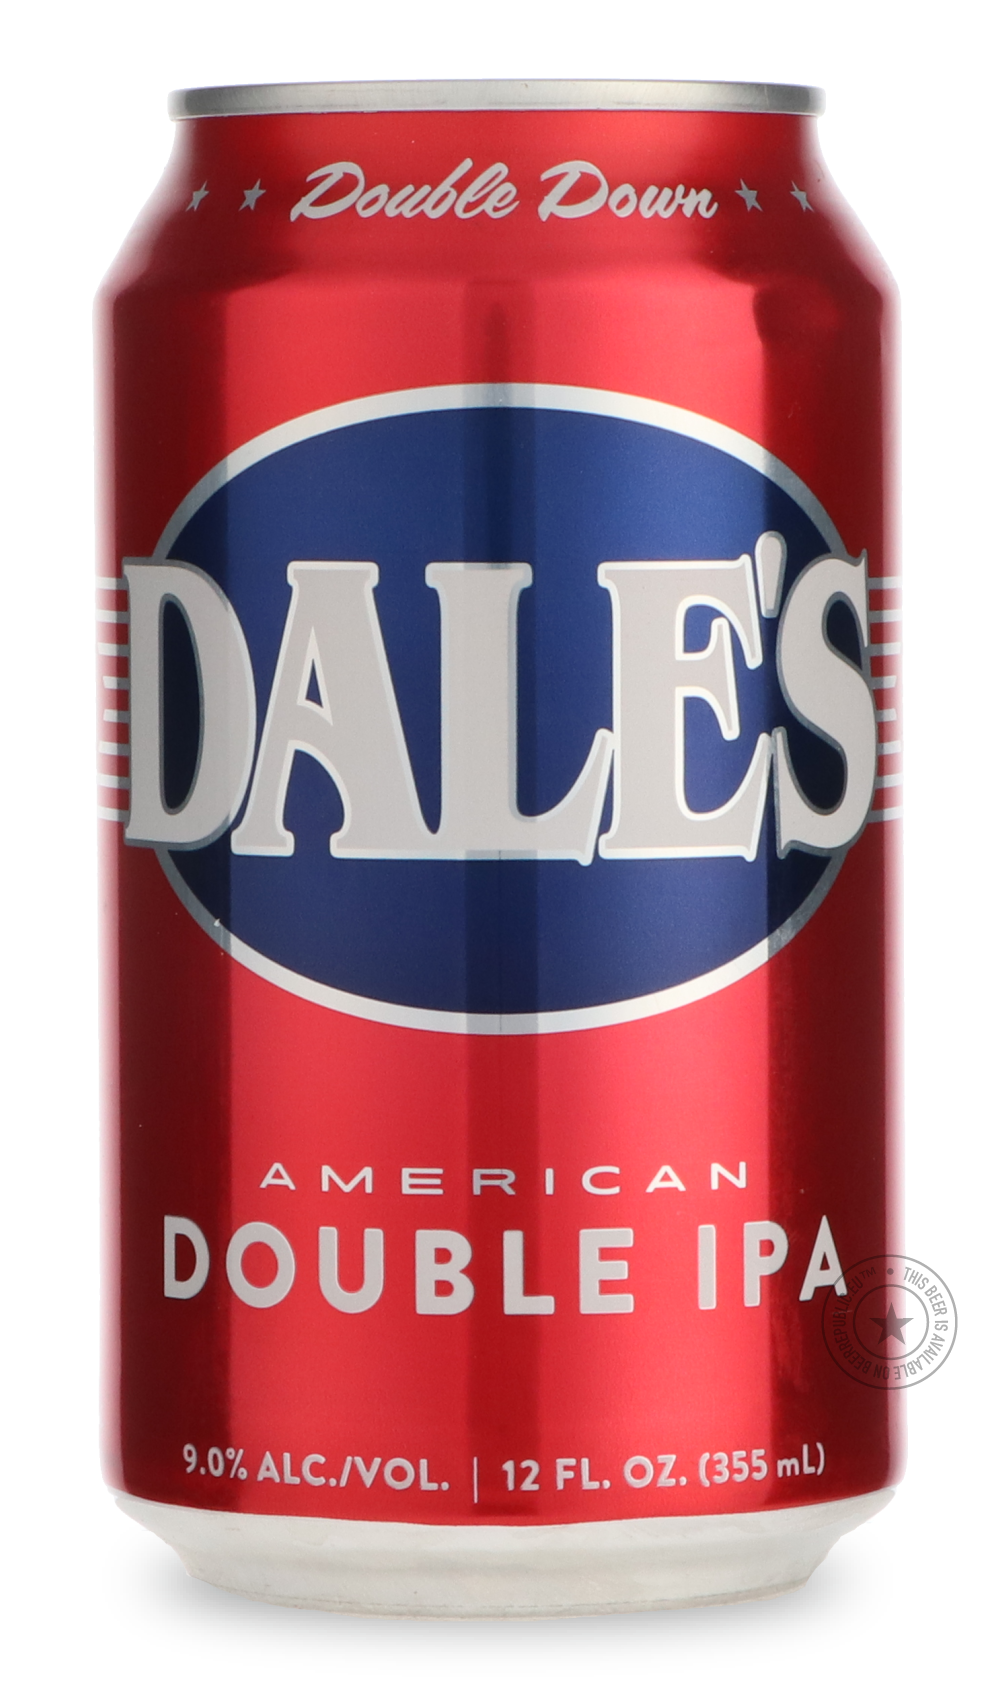 -Oskar Blues- Double Dale's-IPA- Only @ Beer Republic - The best online beer store for American & Canadian craft beer - Buy beer online from the USA and Canada - Bier online kopen - Amerikaans bier kopen - Craft beer store - Craft beer kopen - Amerikanisch bier kaufen - Bier online kaufen - Acheter biere online - IPA - Stout - Porter - New England IPA - Hazy IPA - Imperial Stout - Barrel Aged - Barrel Aged Imperial Stout - Brown - Dark beer - Blond - Blonde - Pilsner - Lager - Wheat - Weizen - Amber - Barle